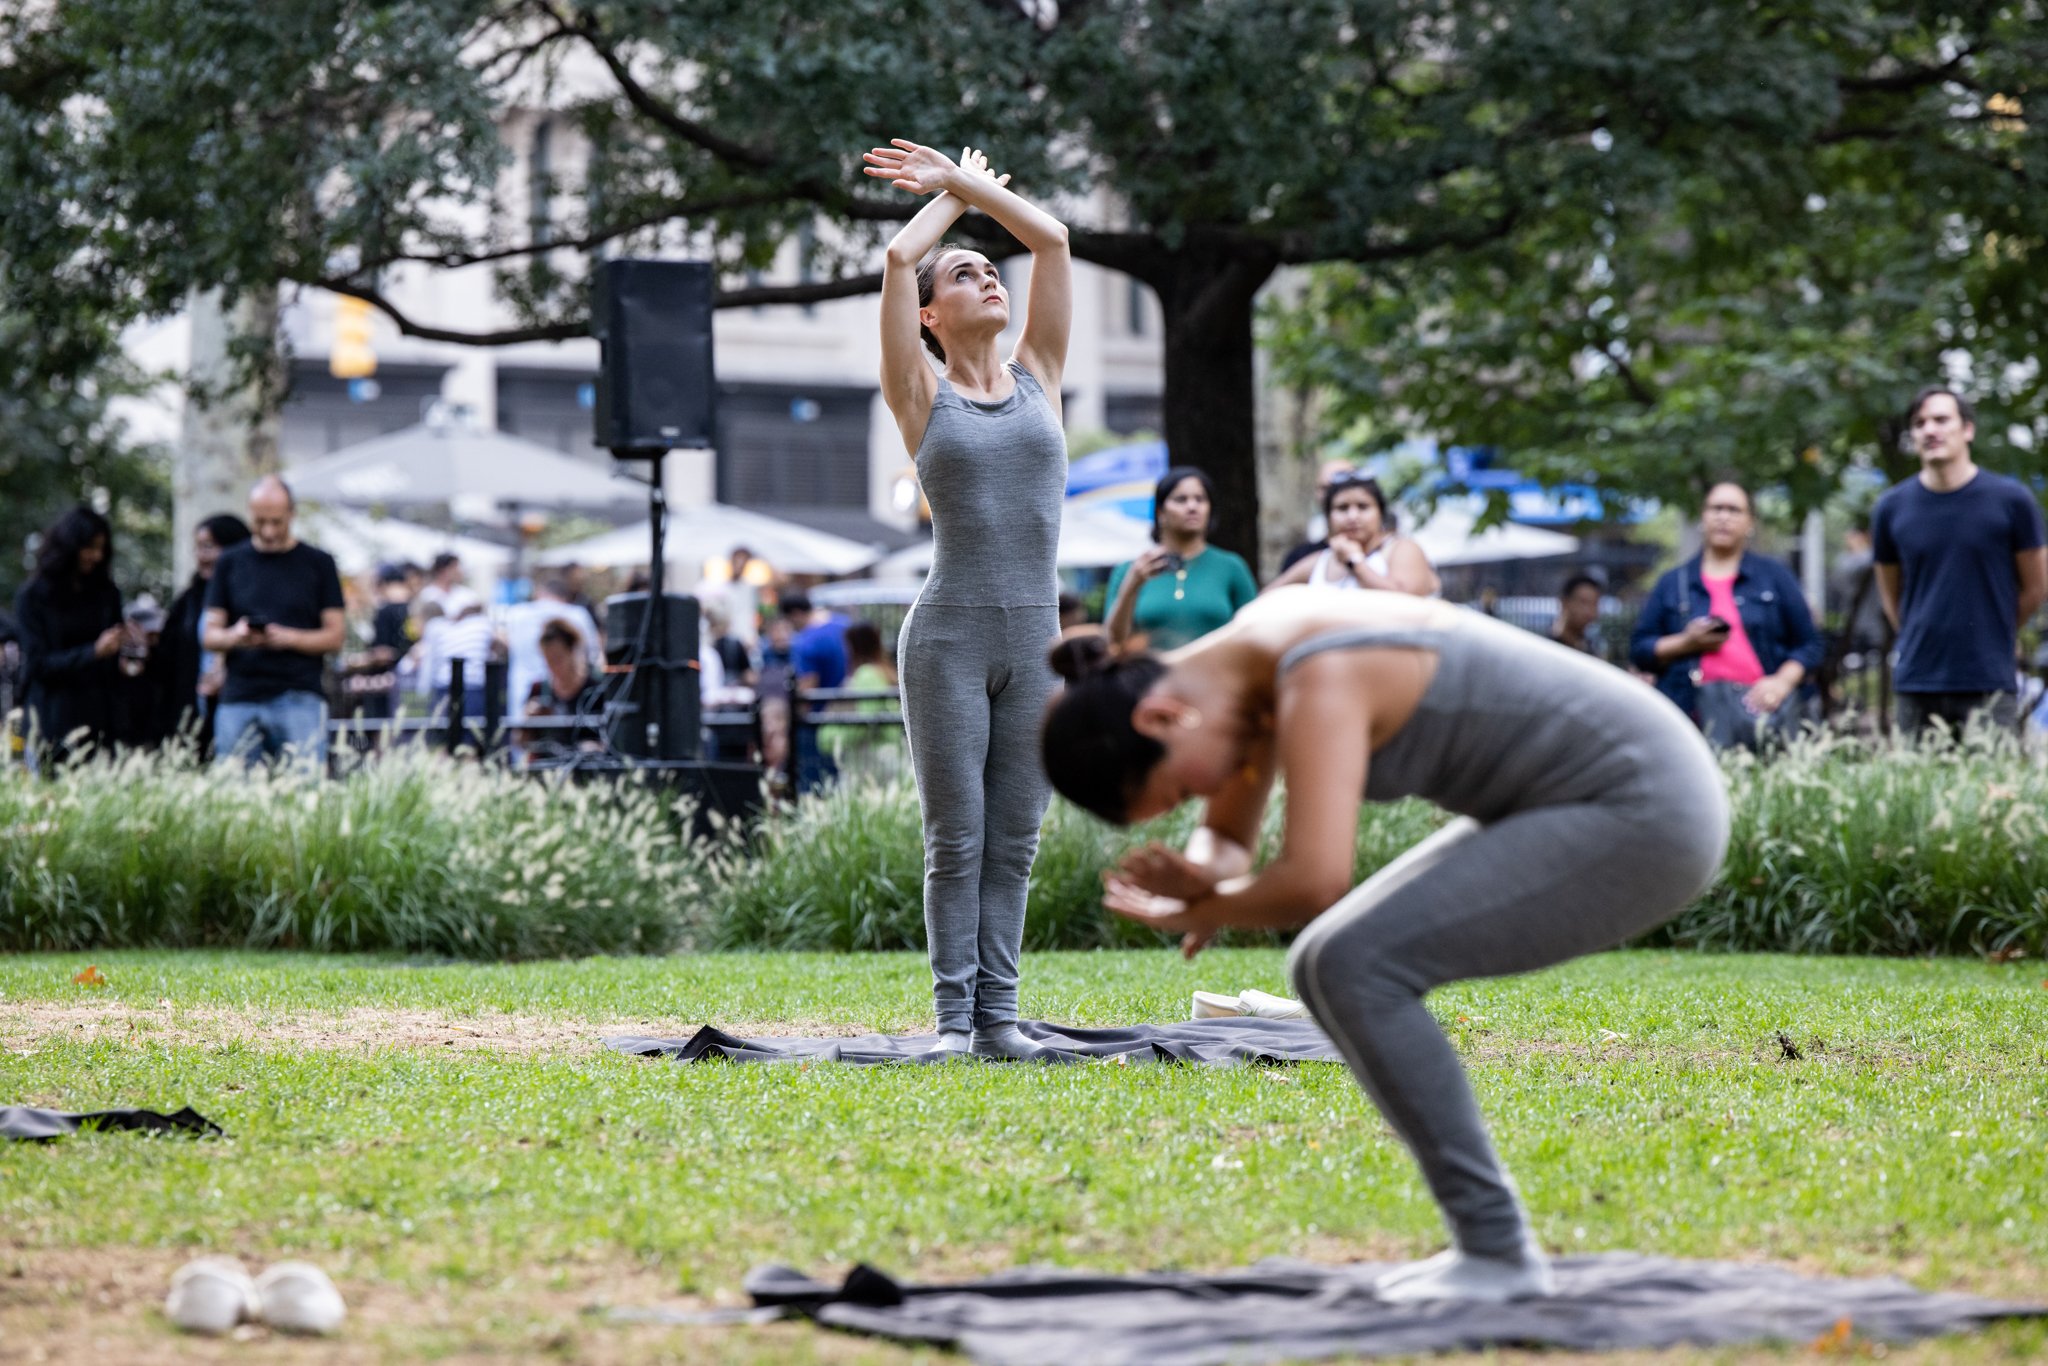  Cara McManus &amp; Rhee in Beau Bree Rhee, Shadow of the Sea, 2022. Performance view, Madison Square Park, September 21, 2022. Presented by The Kitchen in partnership with Madison Square Park Conservancy. Artwork pictured: Cristina Iglesias (Spanish